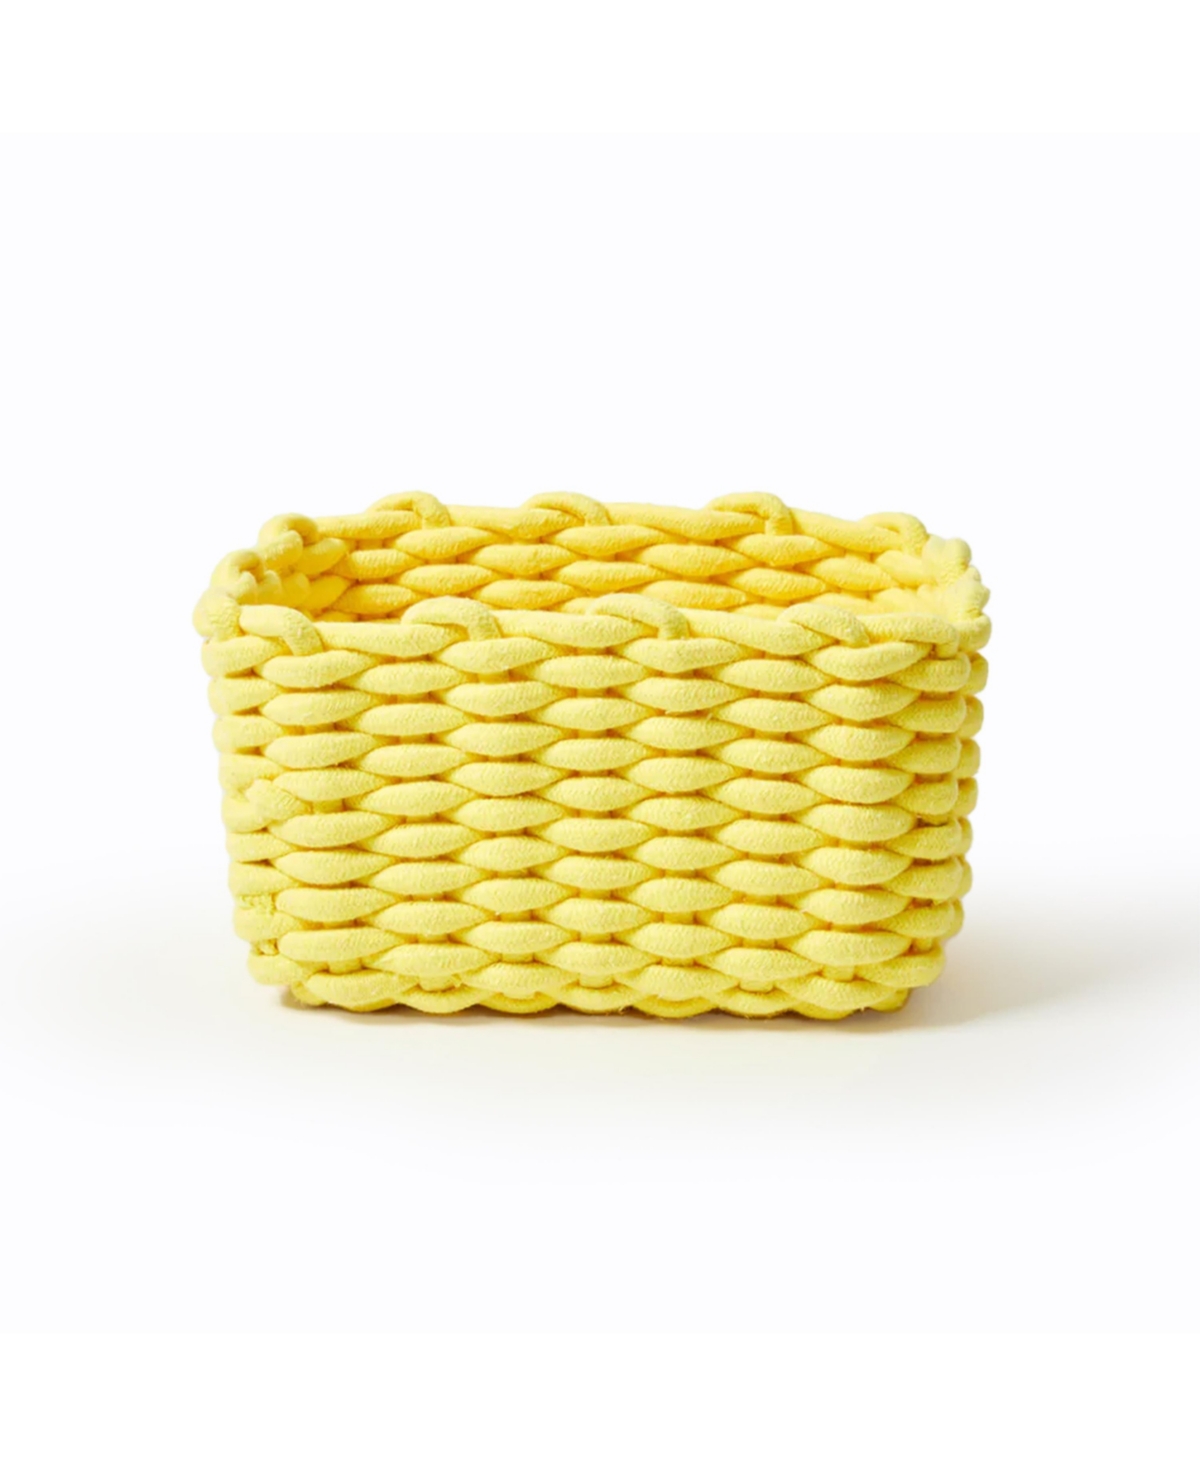 Ava Small Chunky Knit Basket, Versatile and Convenient - Ava yellow